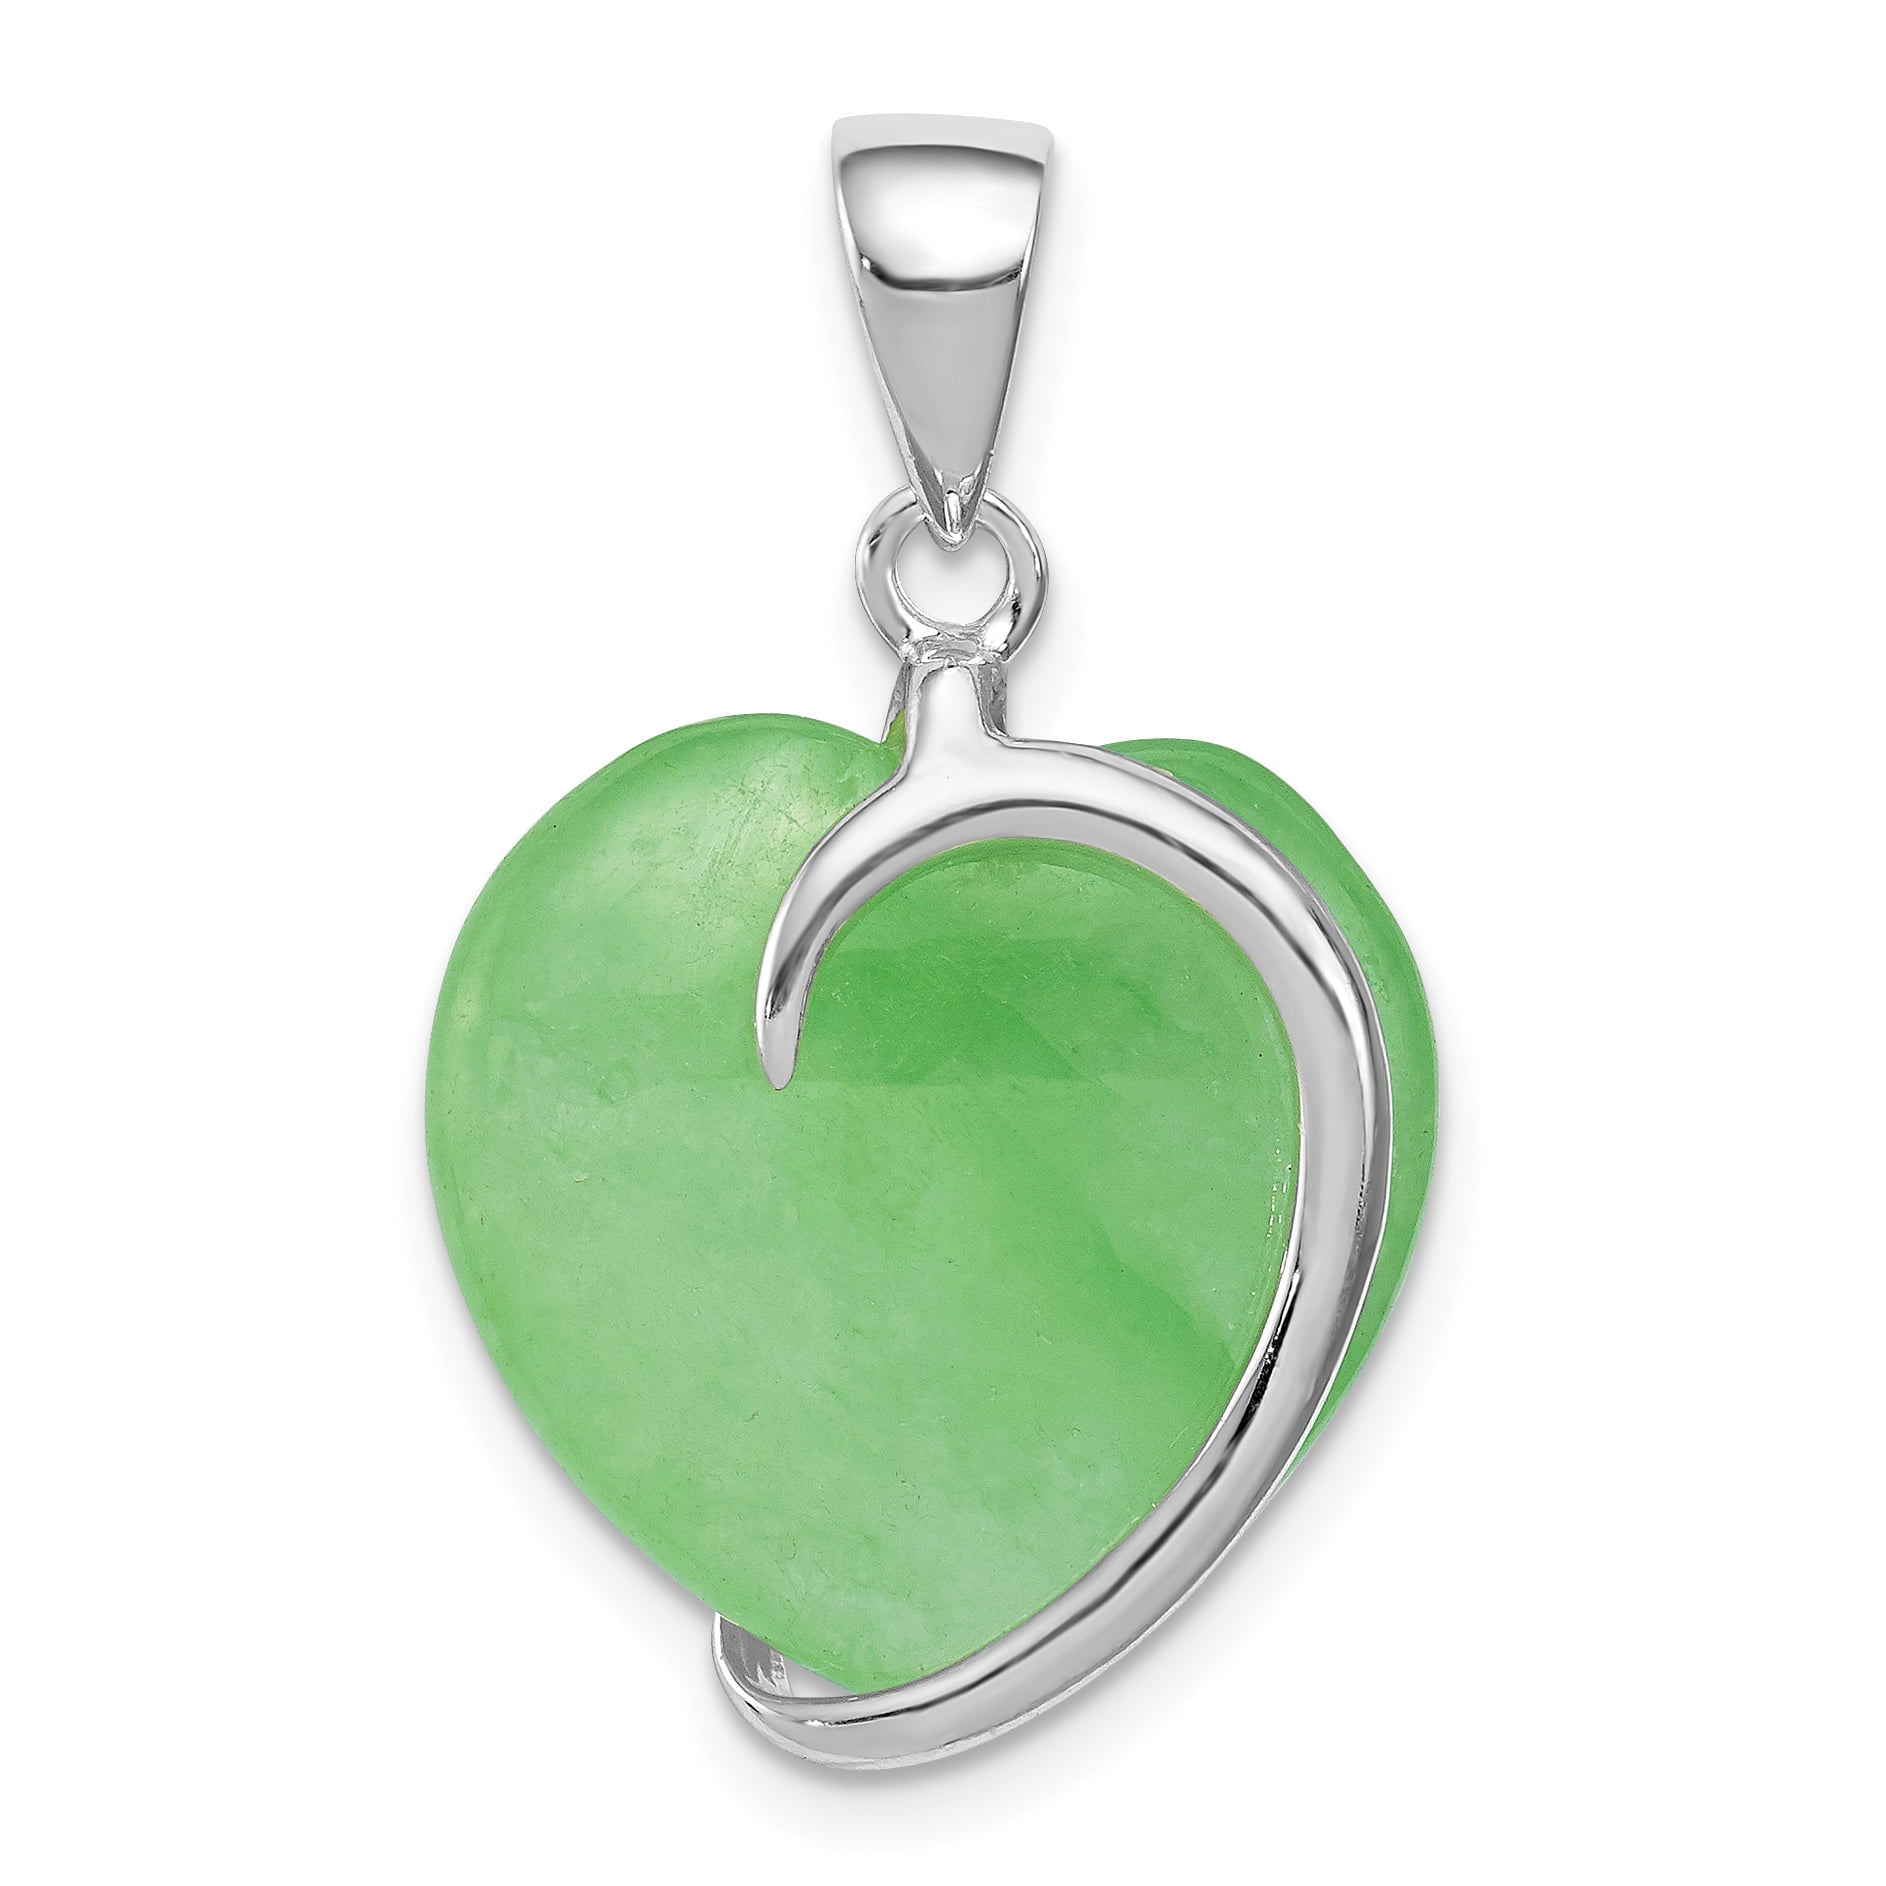 925 Sterling Silver Polished Hearts Round Flat Charm Pendant